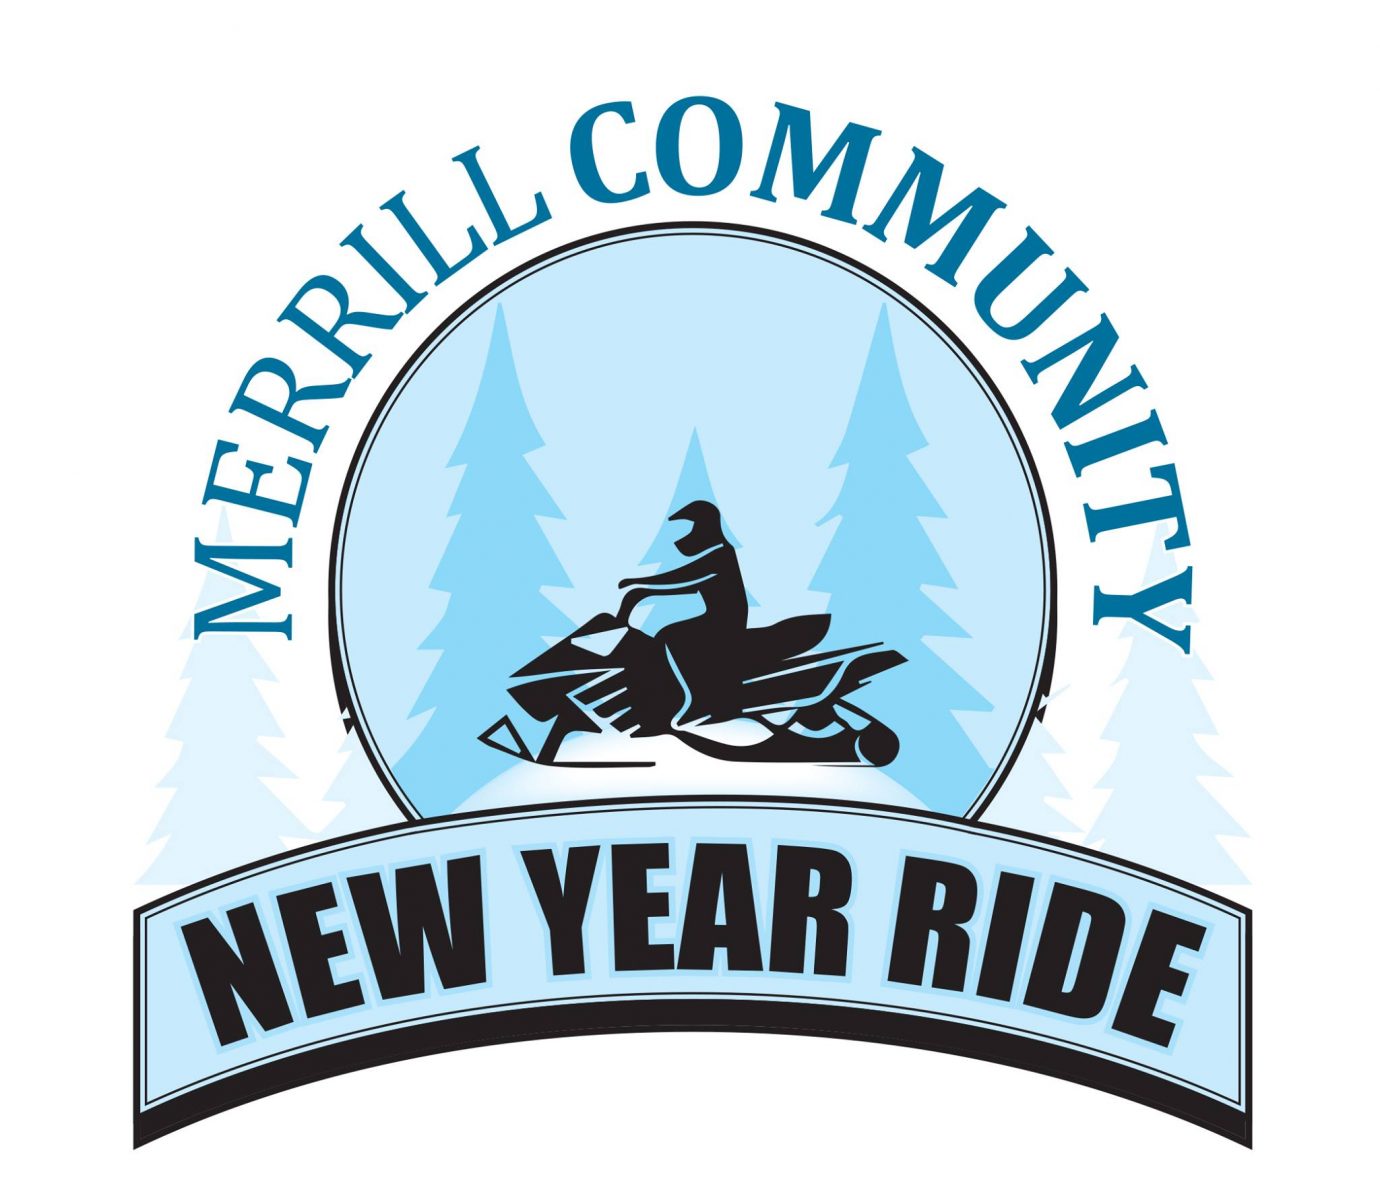 New Year Ride announces 2019 support recipients